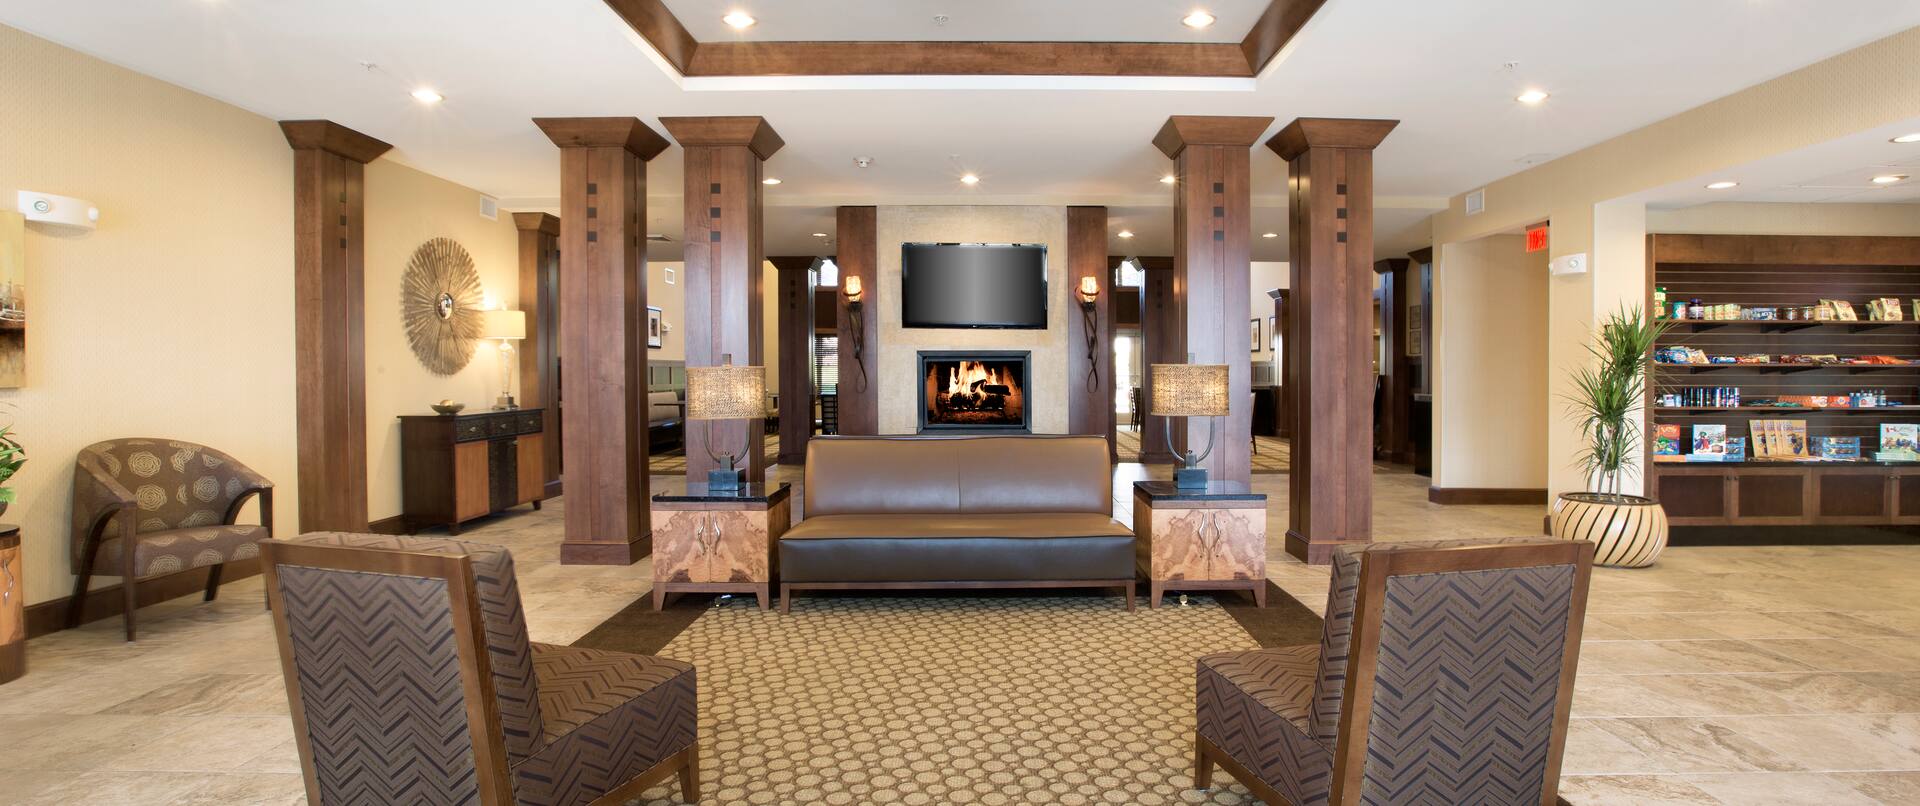 TV Above Fireplace in Lobby Lounge Area With Wood Columns, Soft Seating, Tables, and View of Snack Shop